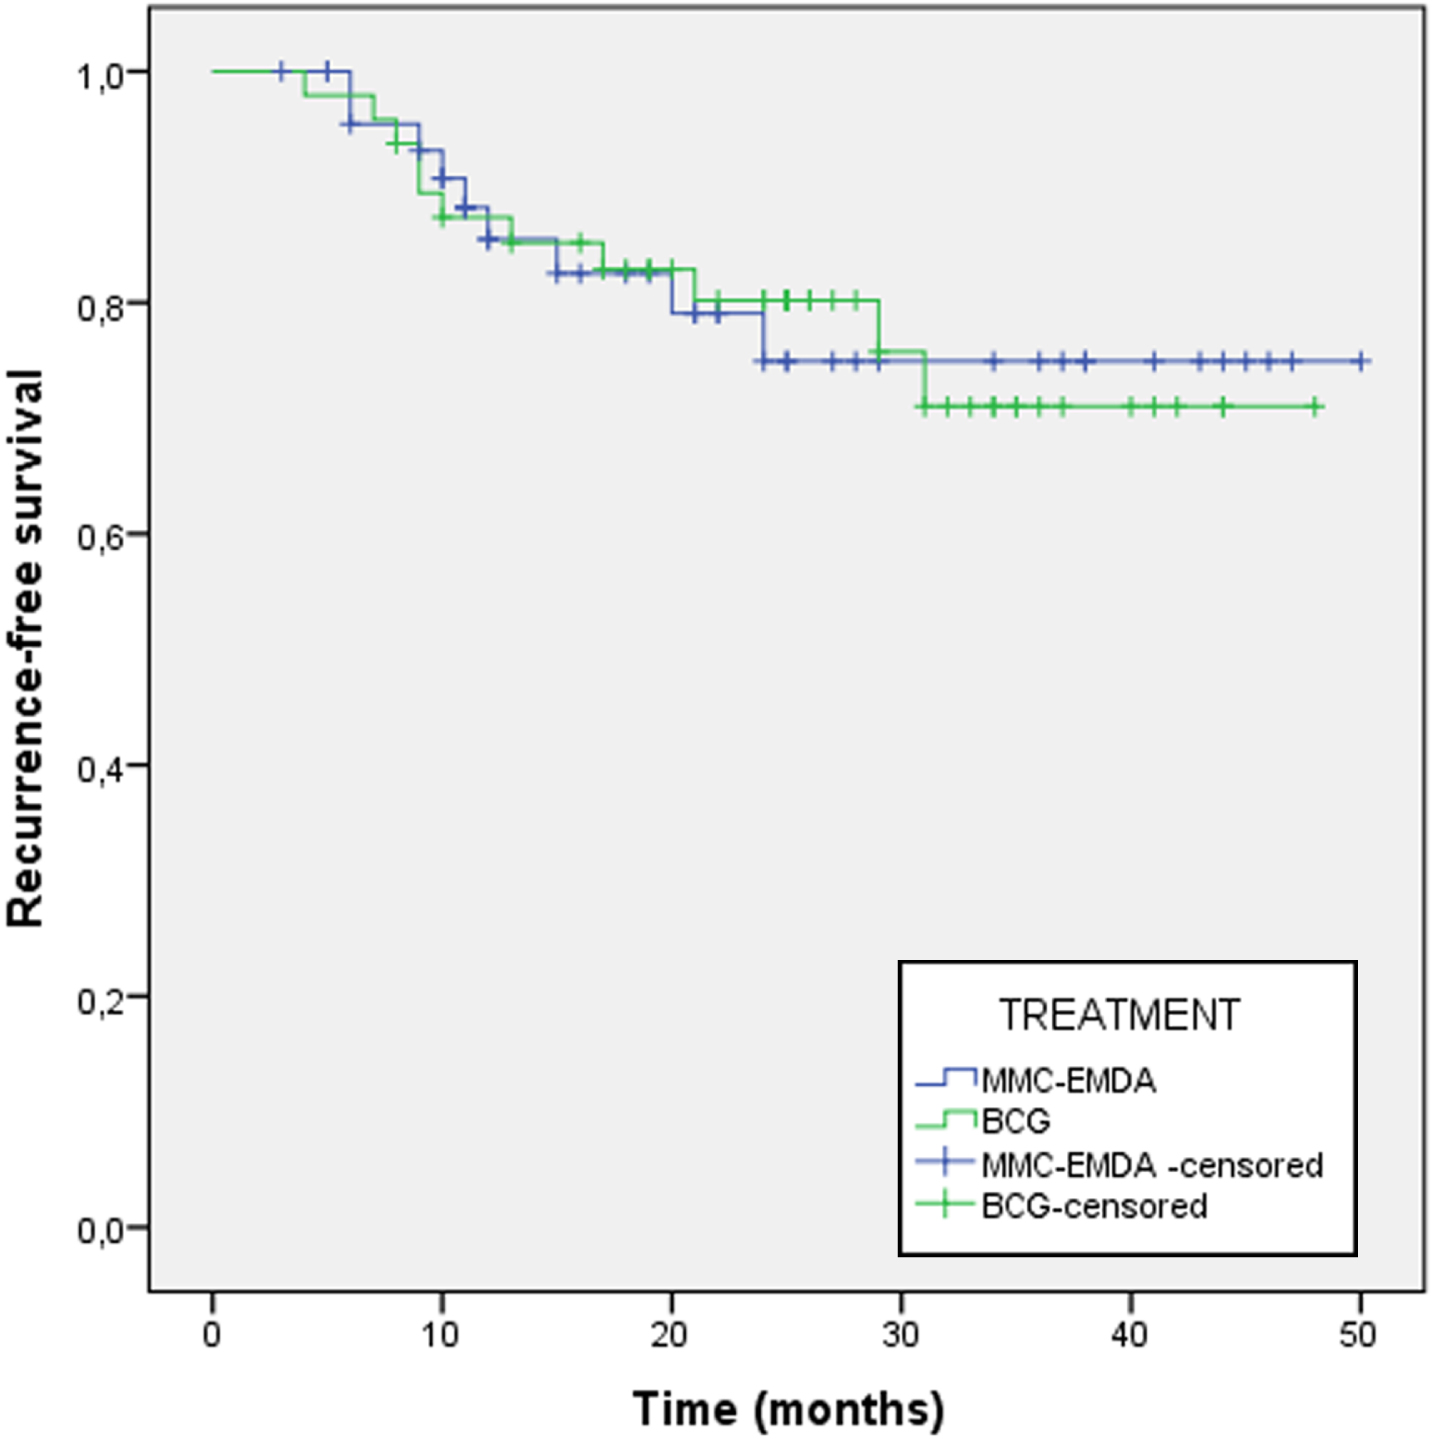 Recurrence-free survival recurrence at 24 months follow-up between MMC-EMDA group and BCG group.